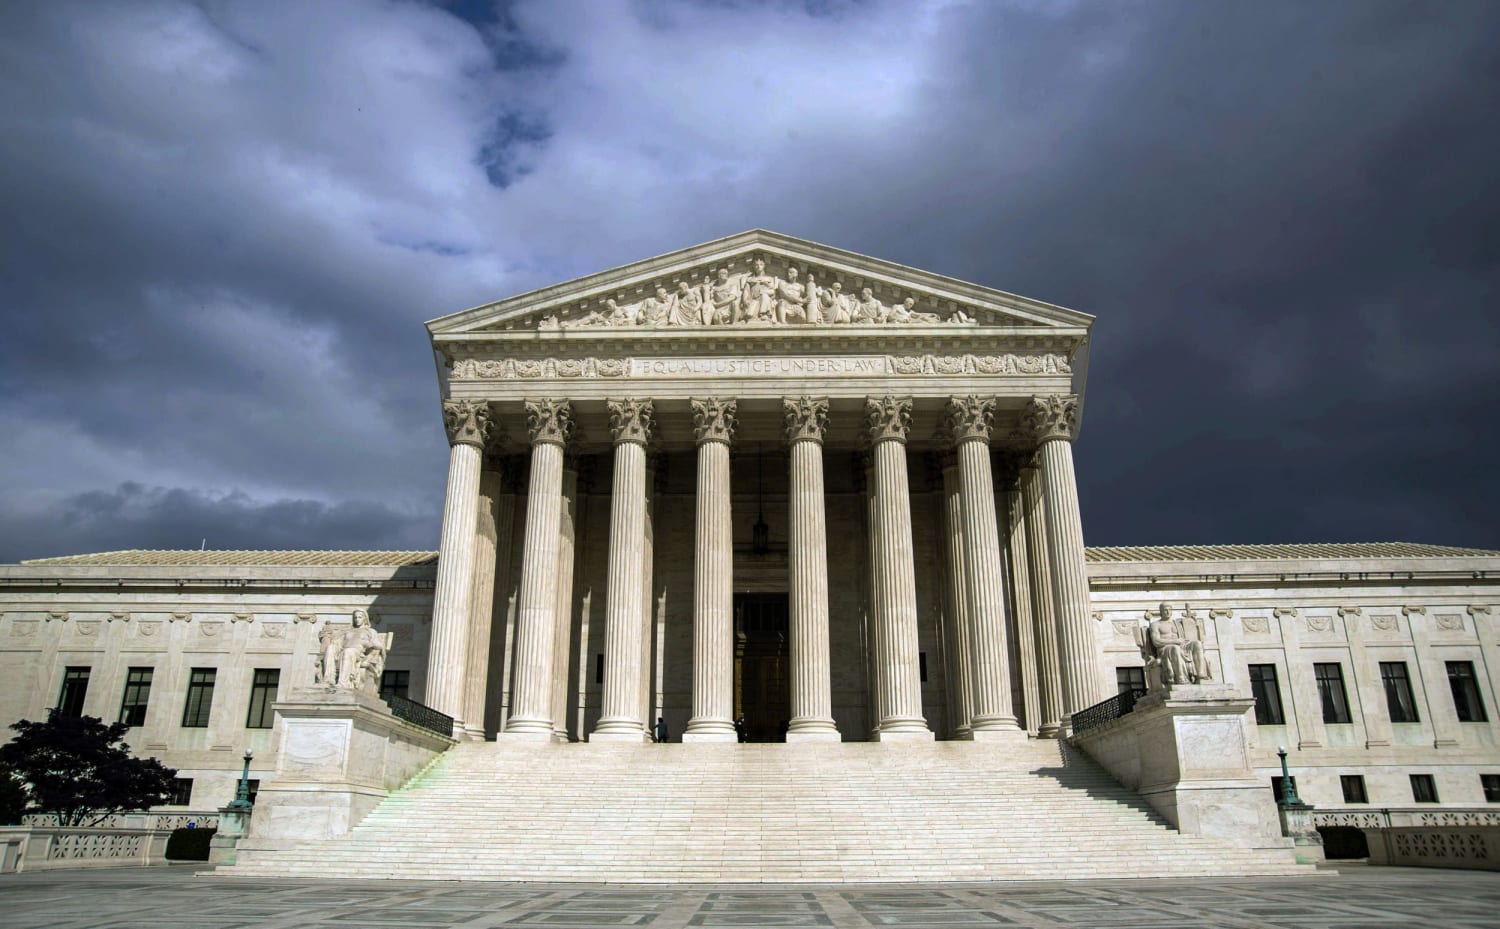 Self-Guide to the Supreme Court Building's Exterior Architecture